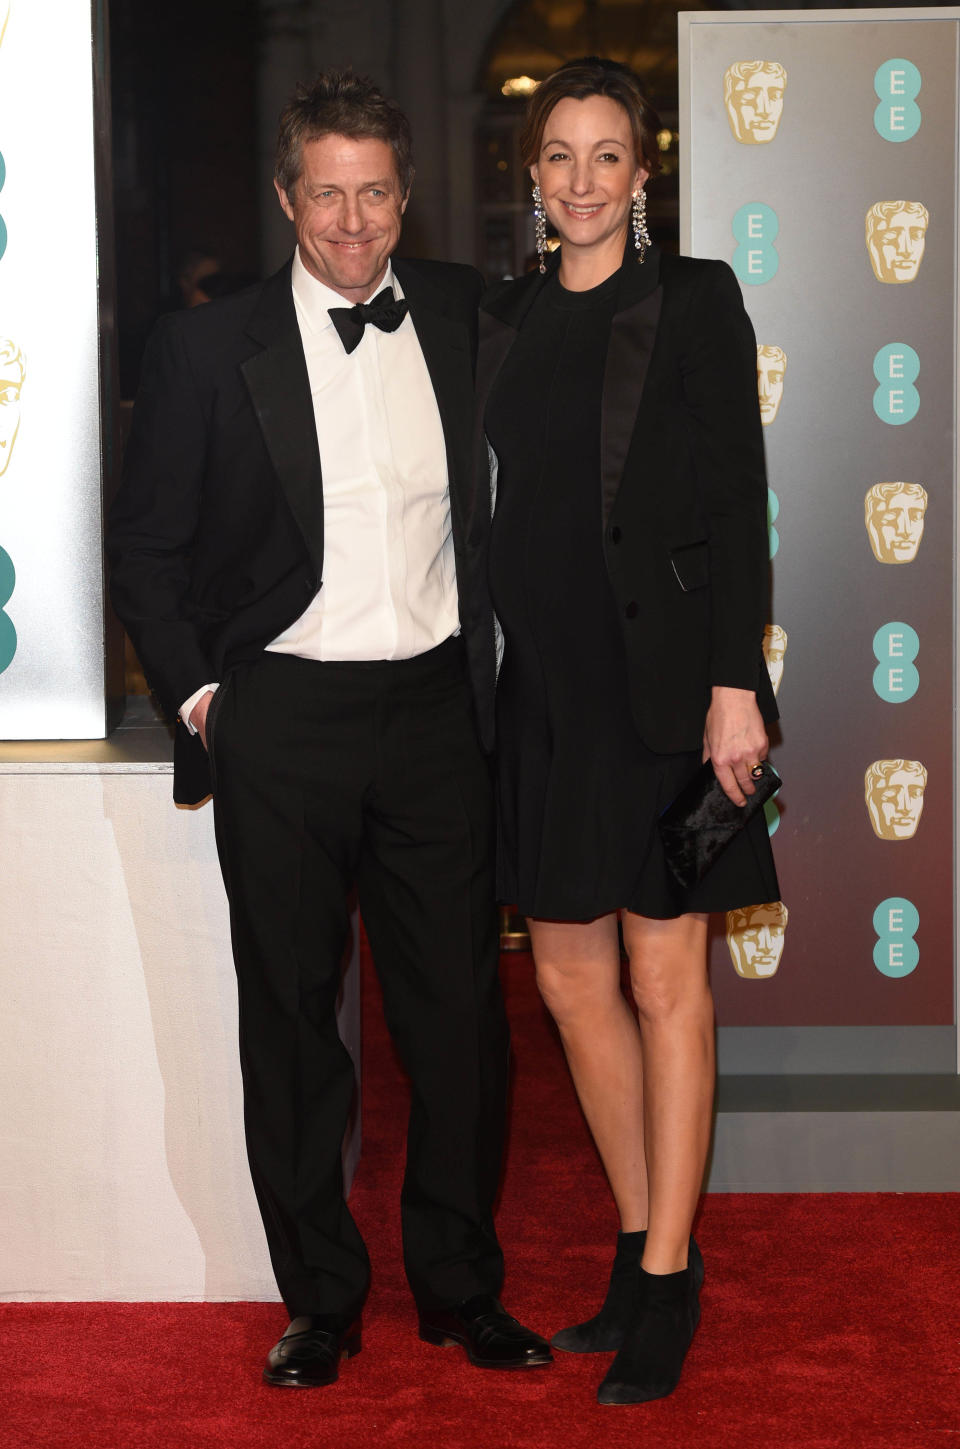 Hugh Grant and Anna Eberstein have made a few red carpet appearances, including one at the <span>71st British Academy Film Awards on Feb. 18, 2018. (Photo: AP Images)</span>